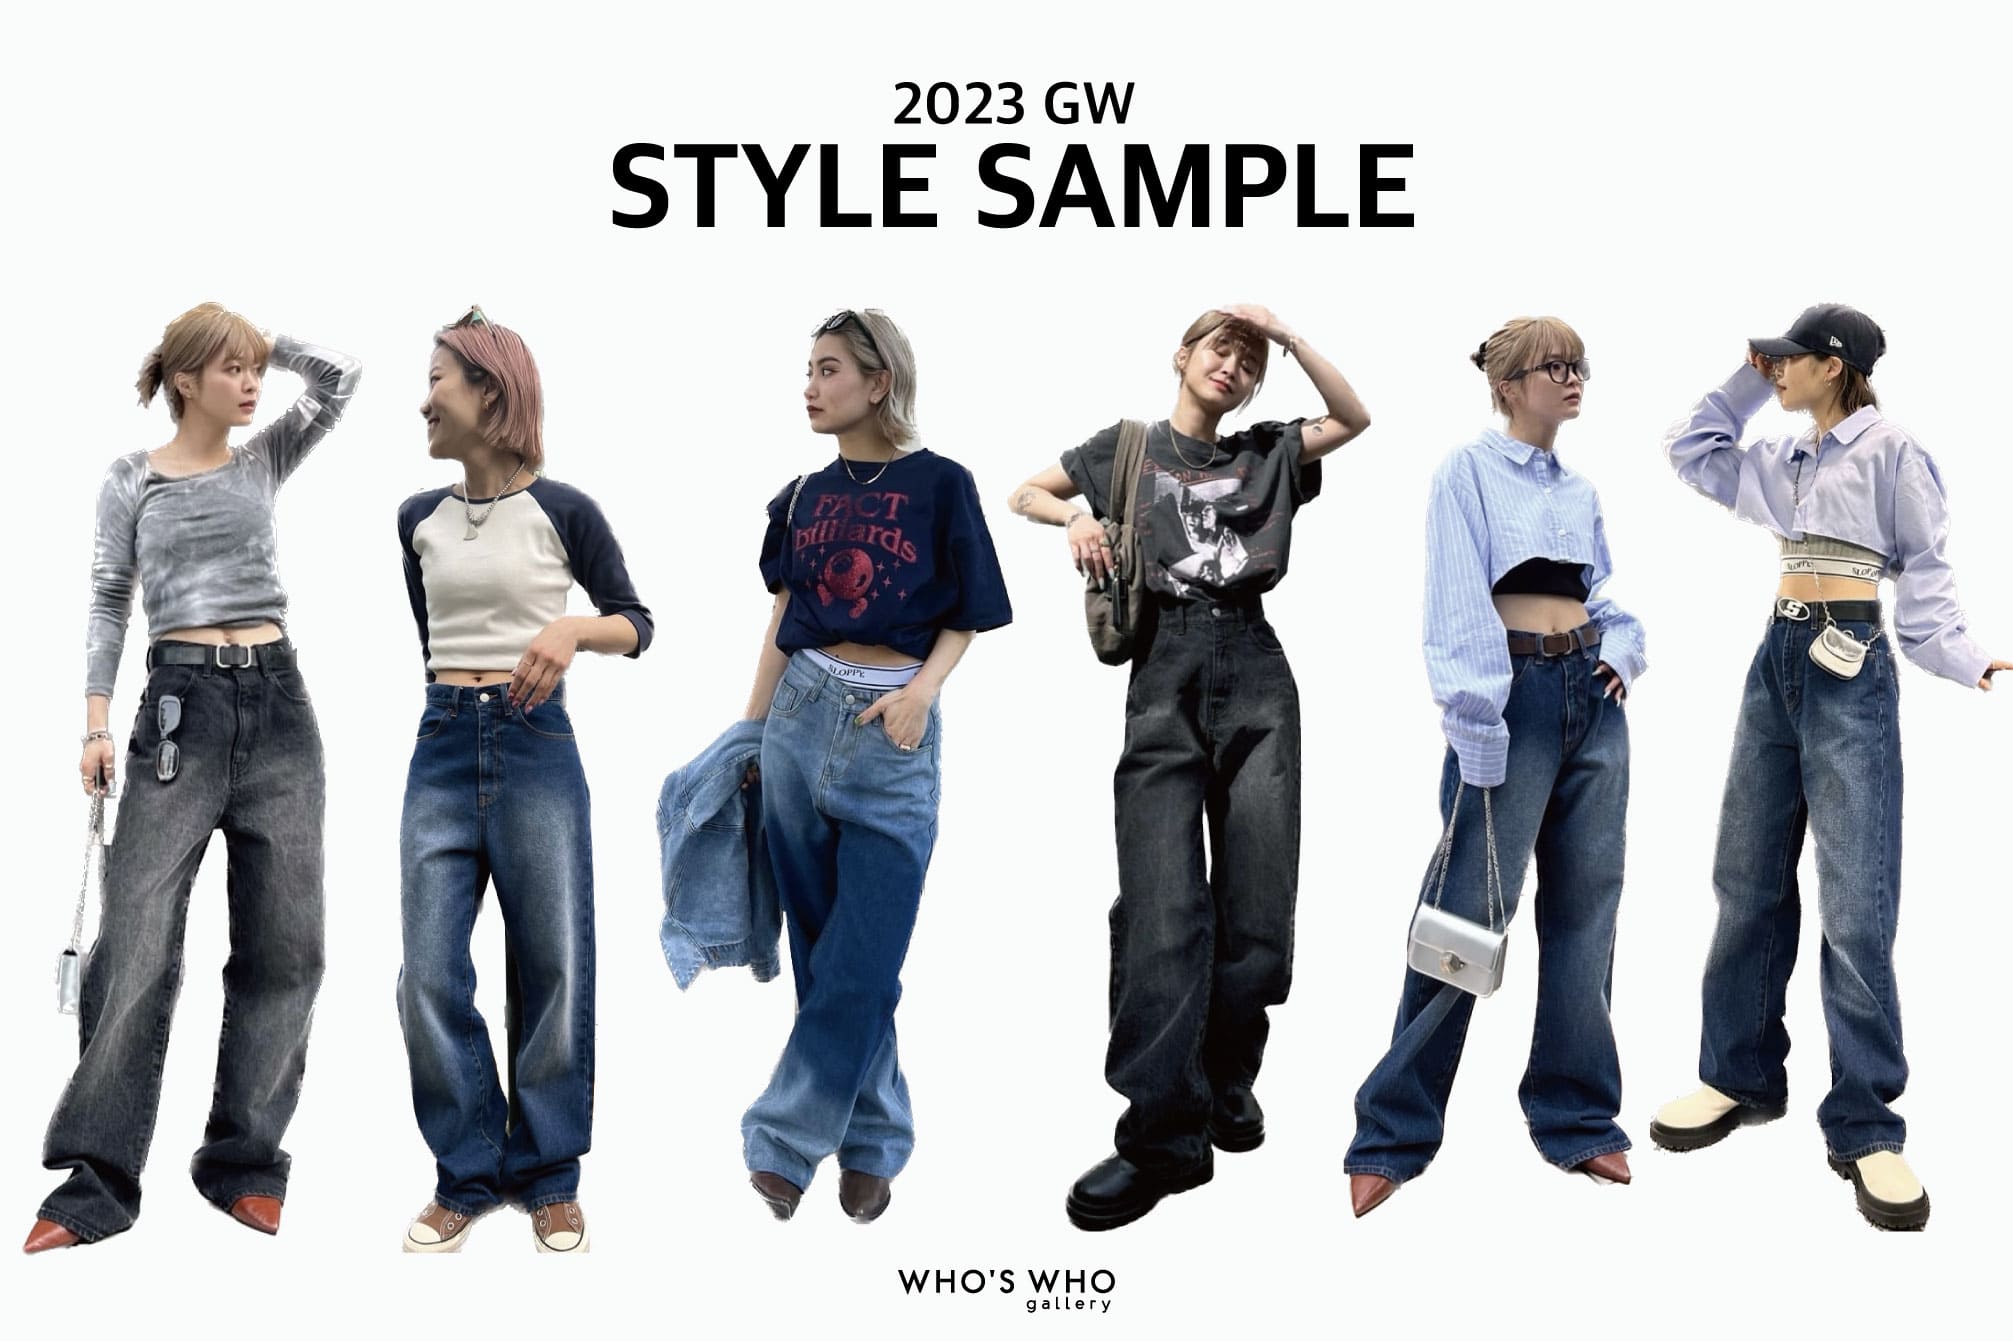 WHO’S WHO gallery 【GW STYLE SAMPLE】